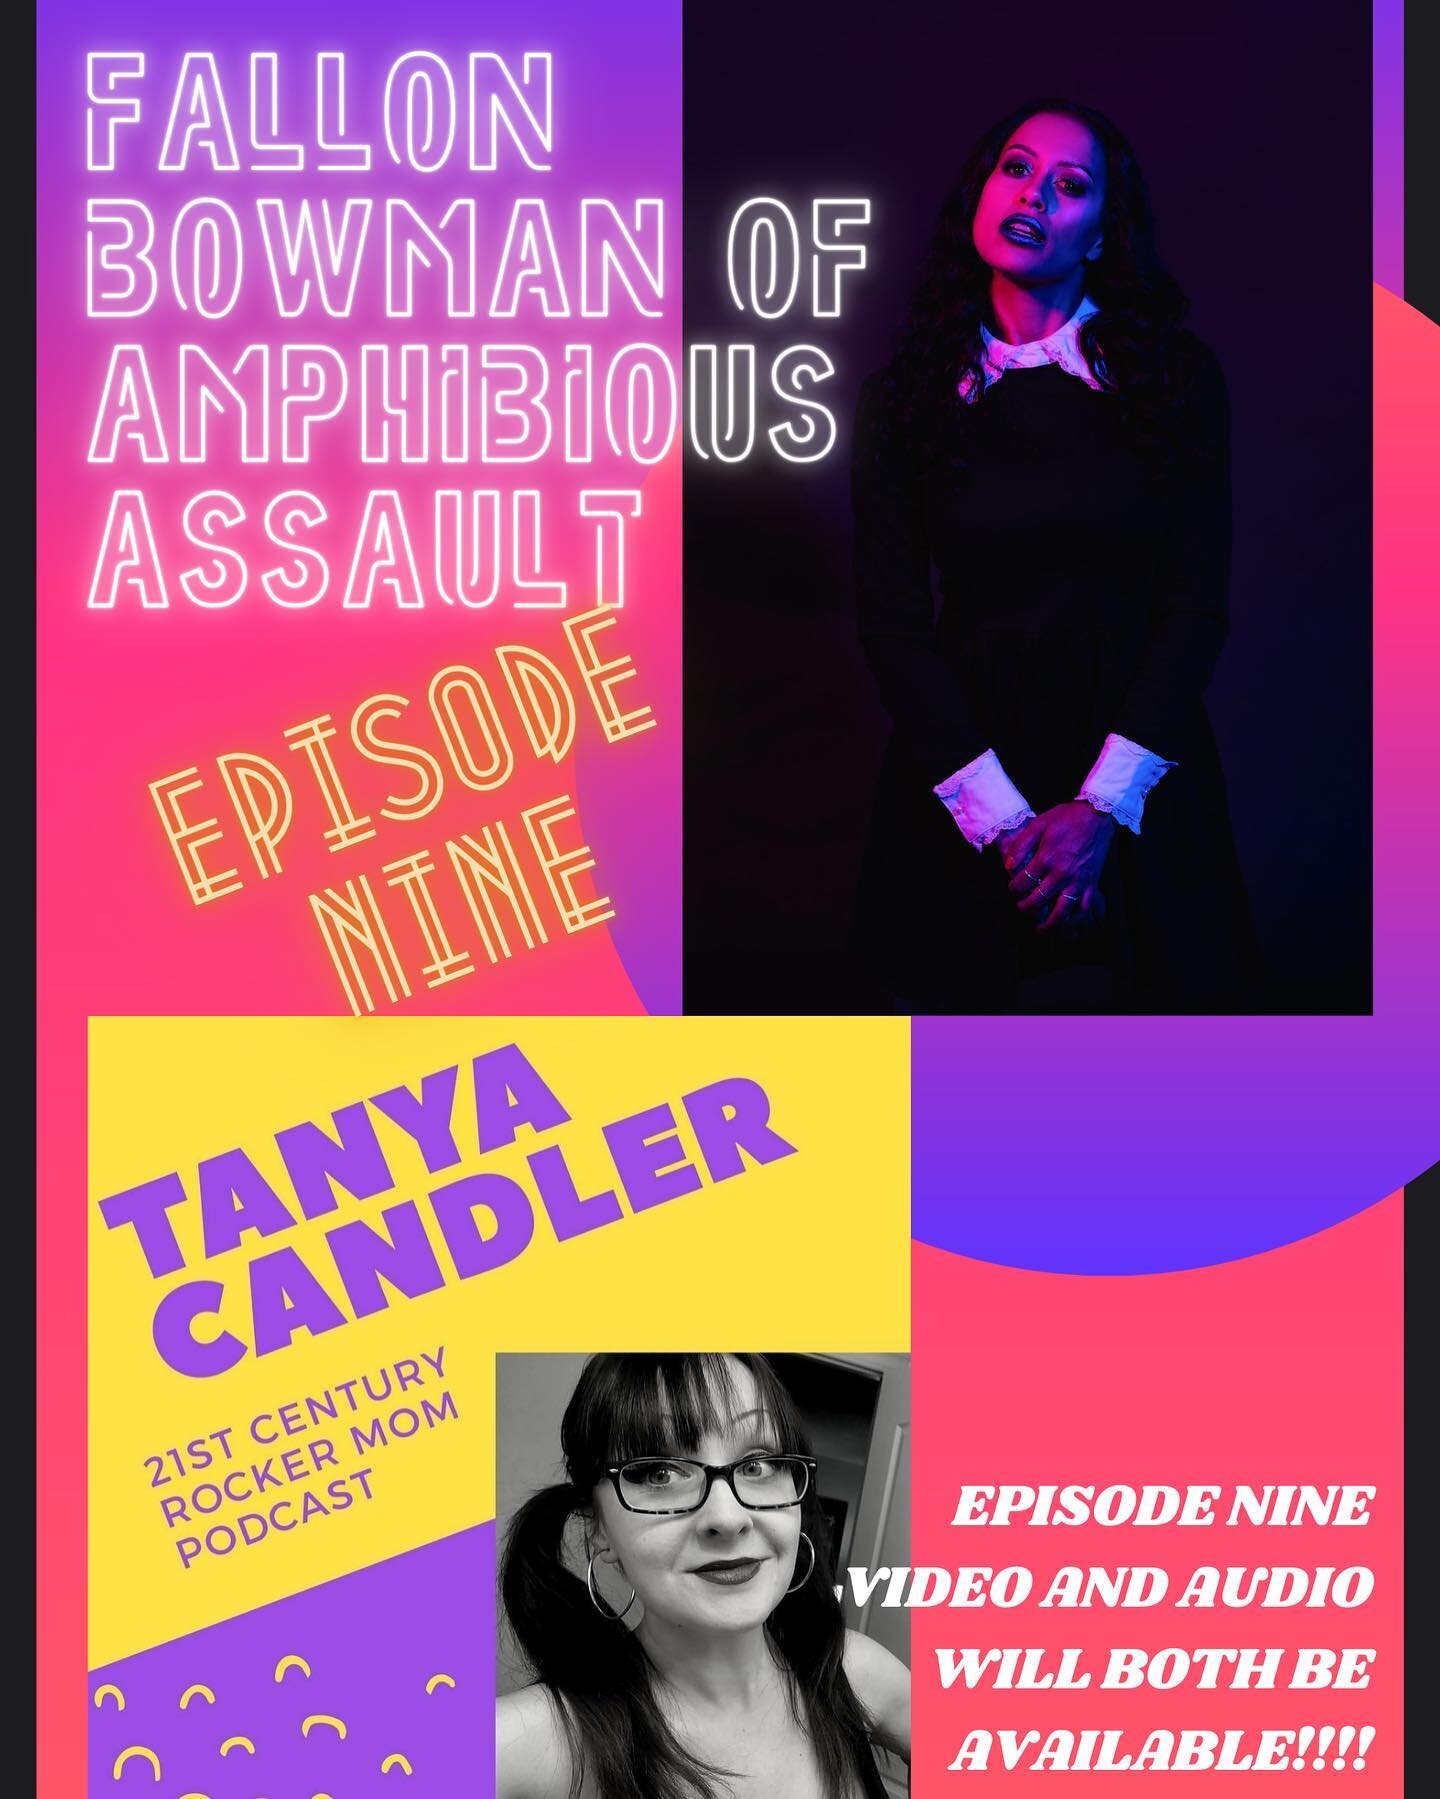 I am thrilled to be talking to @21stcenturyrockermom Tanya Candler (@mrsmacalou) on her podcast this weekend about my new release SIMULACRIMA, band stories, and other back in the day chitchat! Will let you know when it's live :) Go check her out!